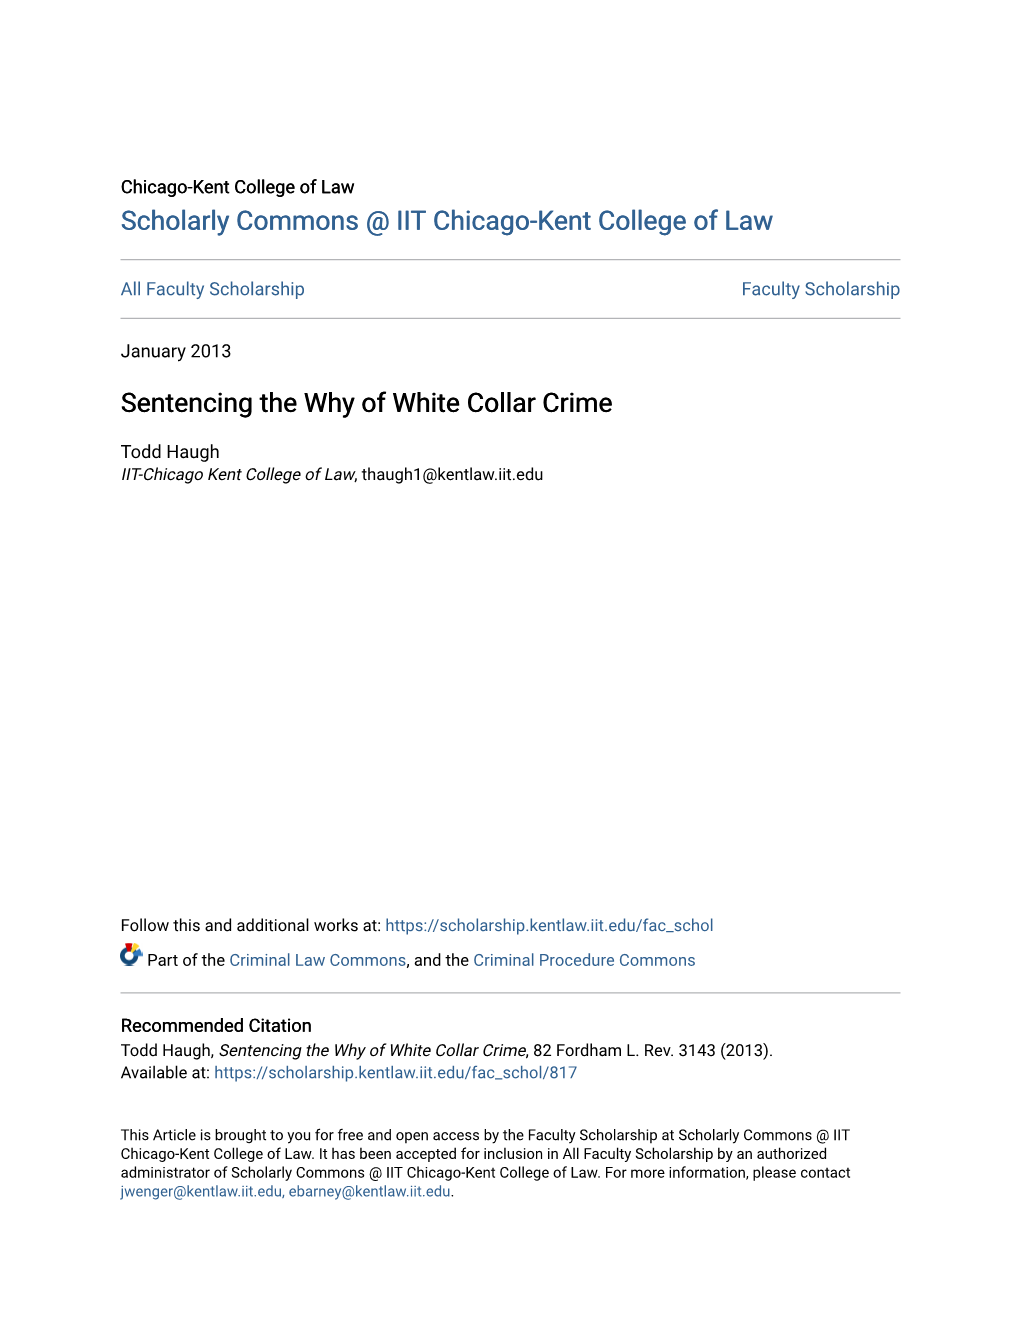 Sentencing the Why of White Collar Crime